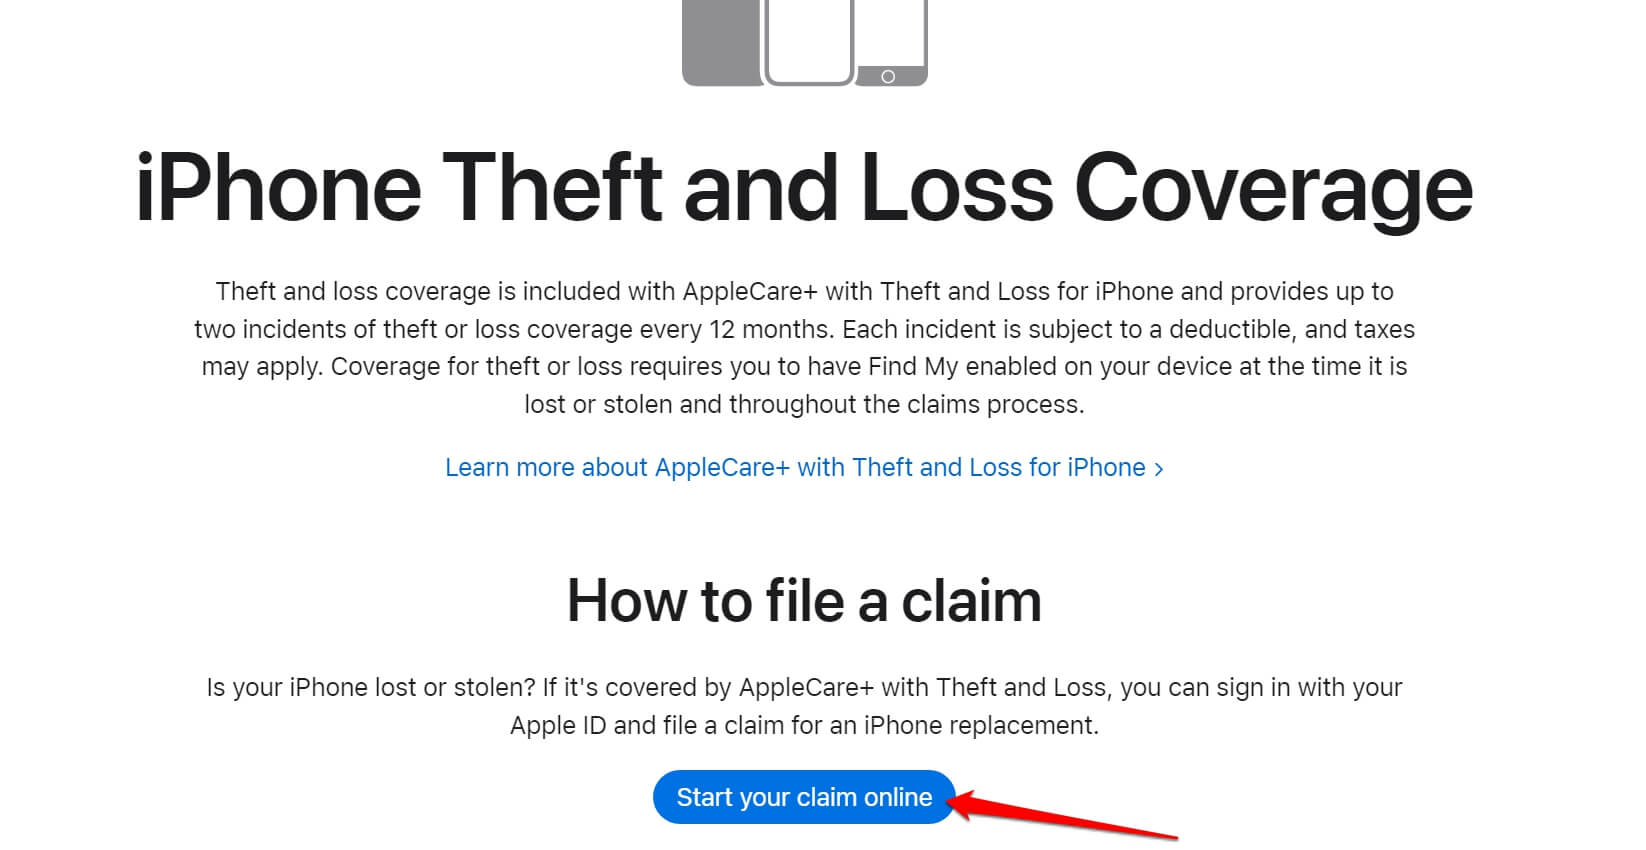 file a claim for stolen iPhone